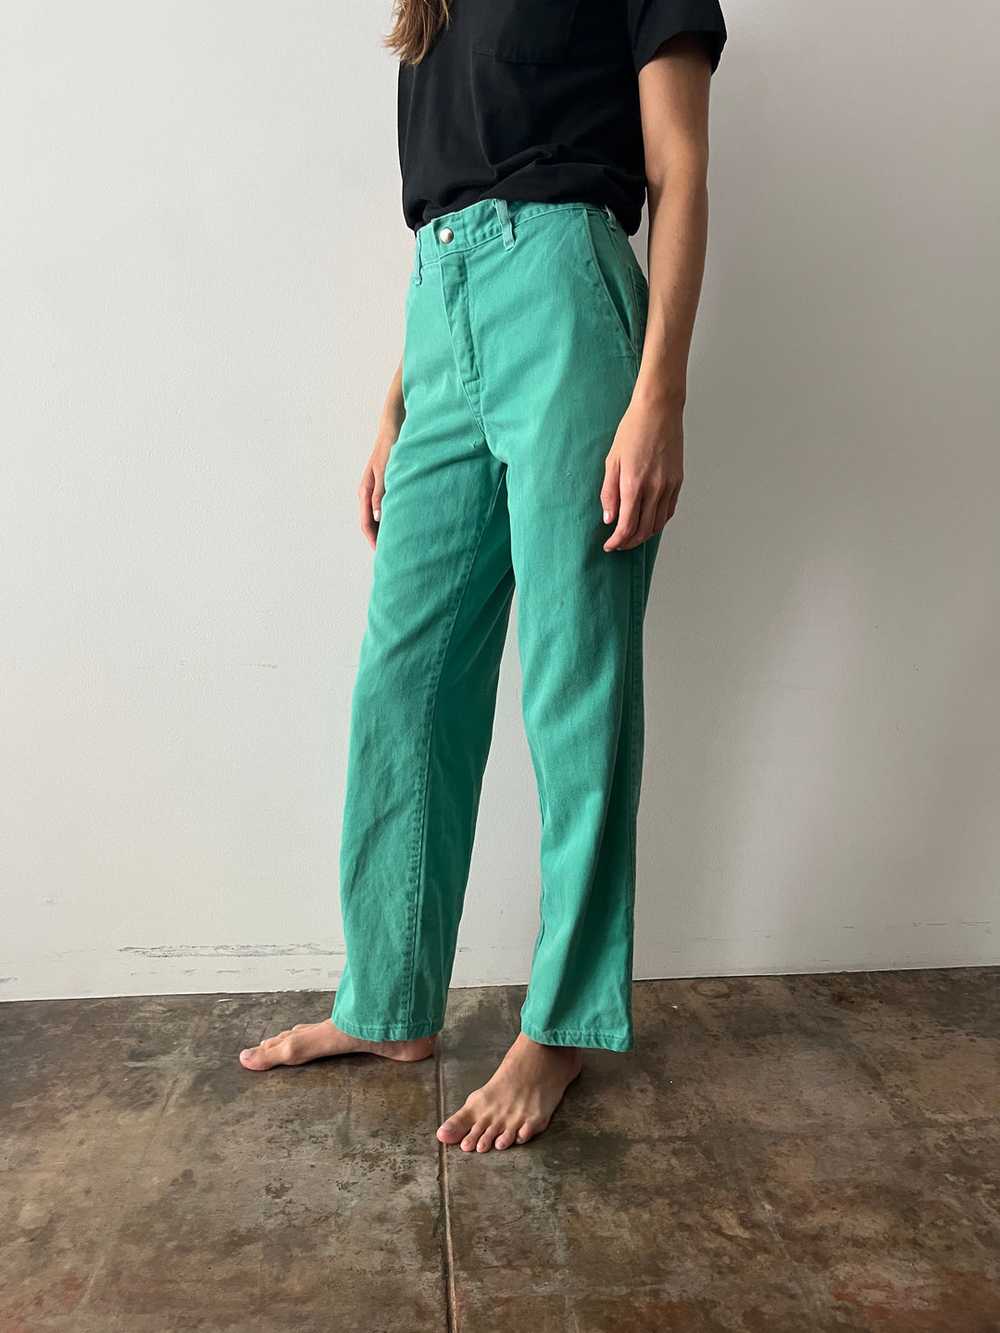 70s/80s Green Cotton Work Pants - image 2